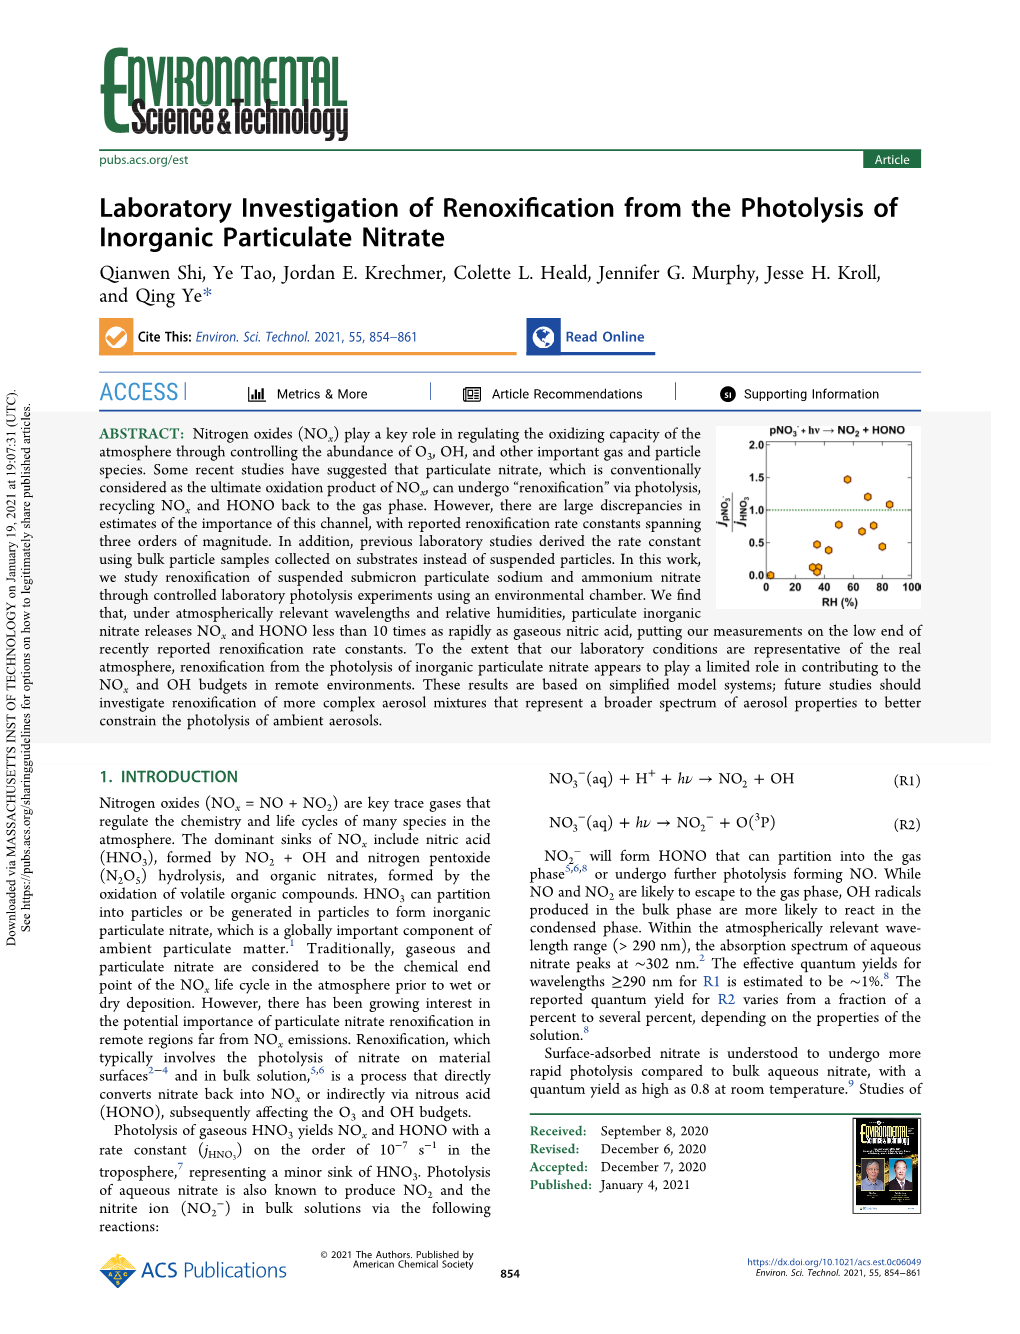 Laboratory Investigation of Renoxification from the Photolysis